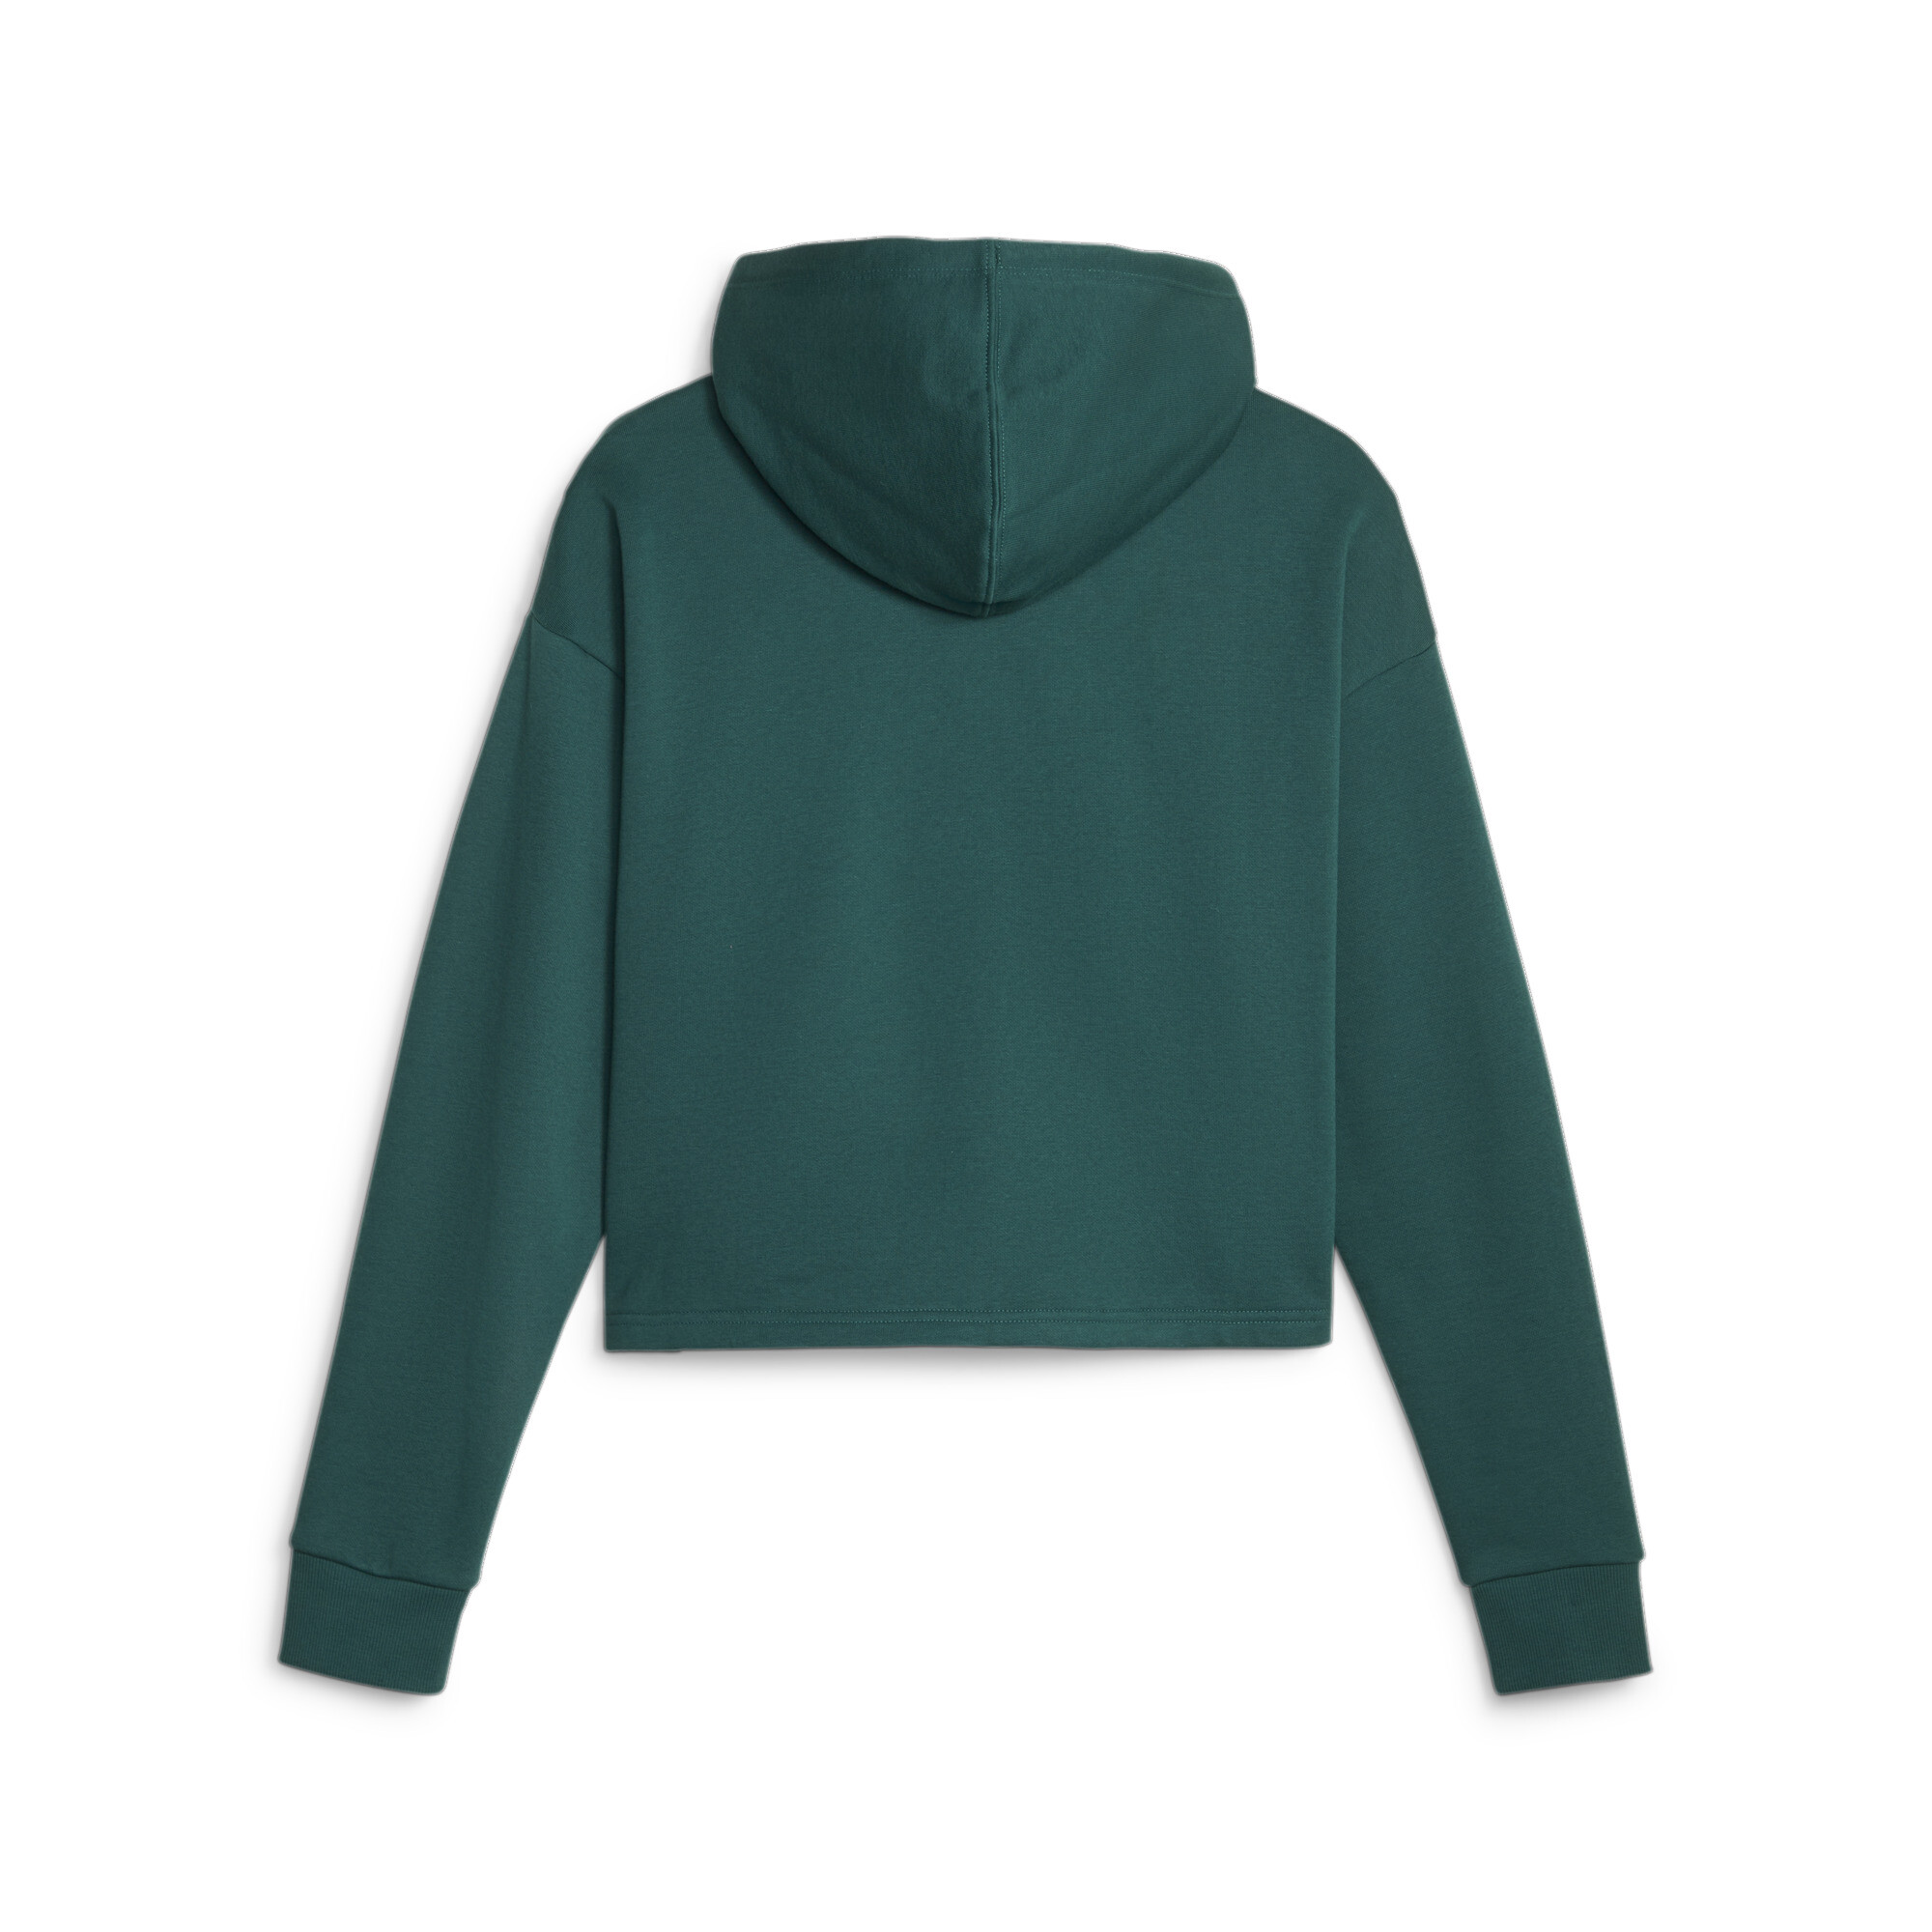 Women's Puma Essentials Cropped Logo's Hoodie, Green, Size XS, Clothing